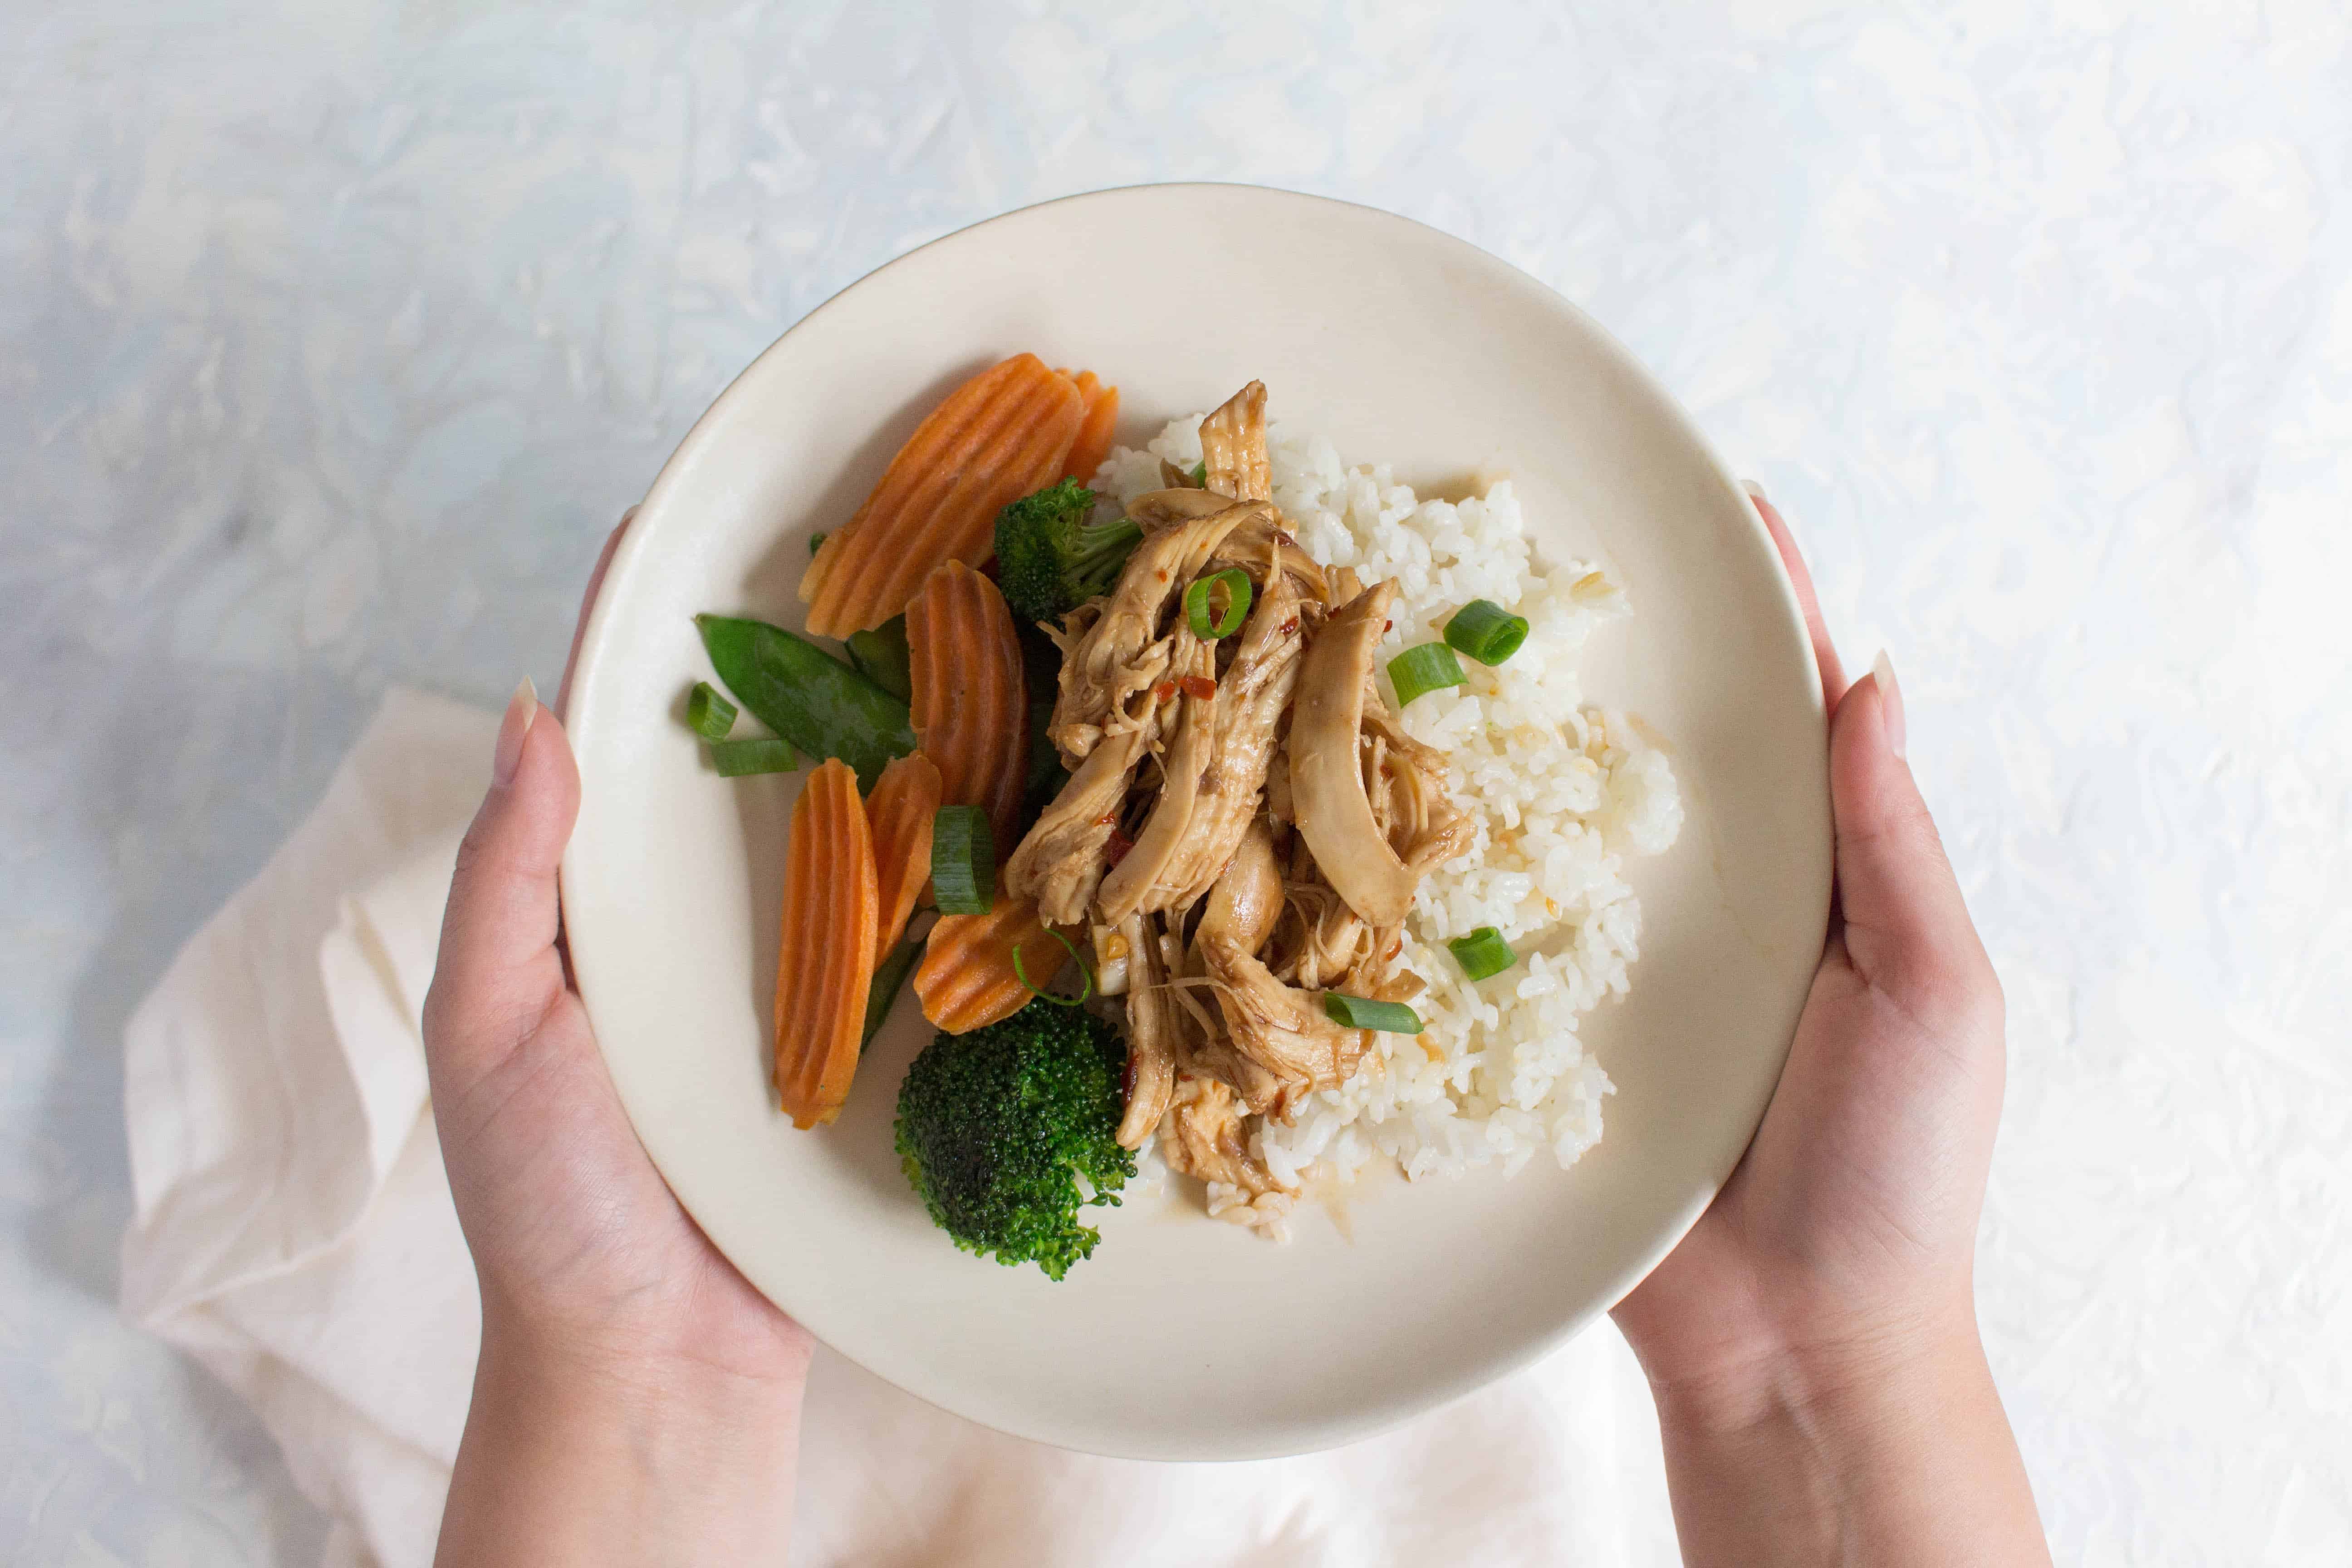 This Instant Pot Teriyaki Chicken is full of bold flavours that will quickly become a weeknight family favourite! Plus it is the perfect speedy protein for your weekend meal prep.